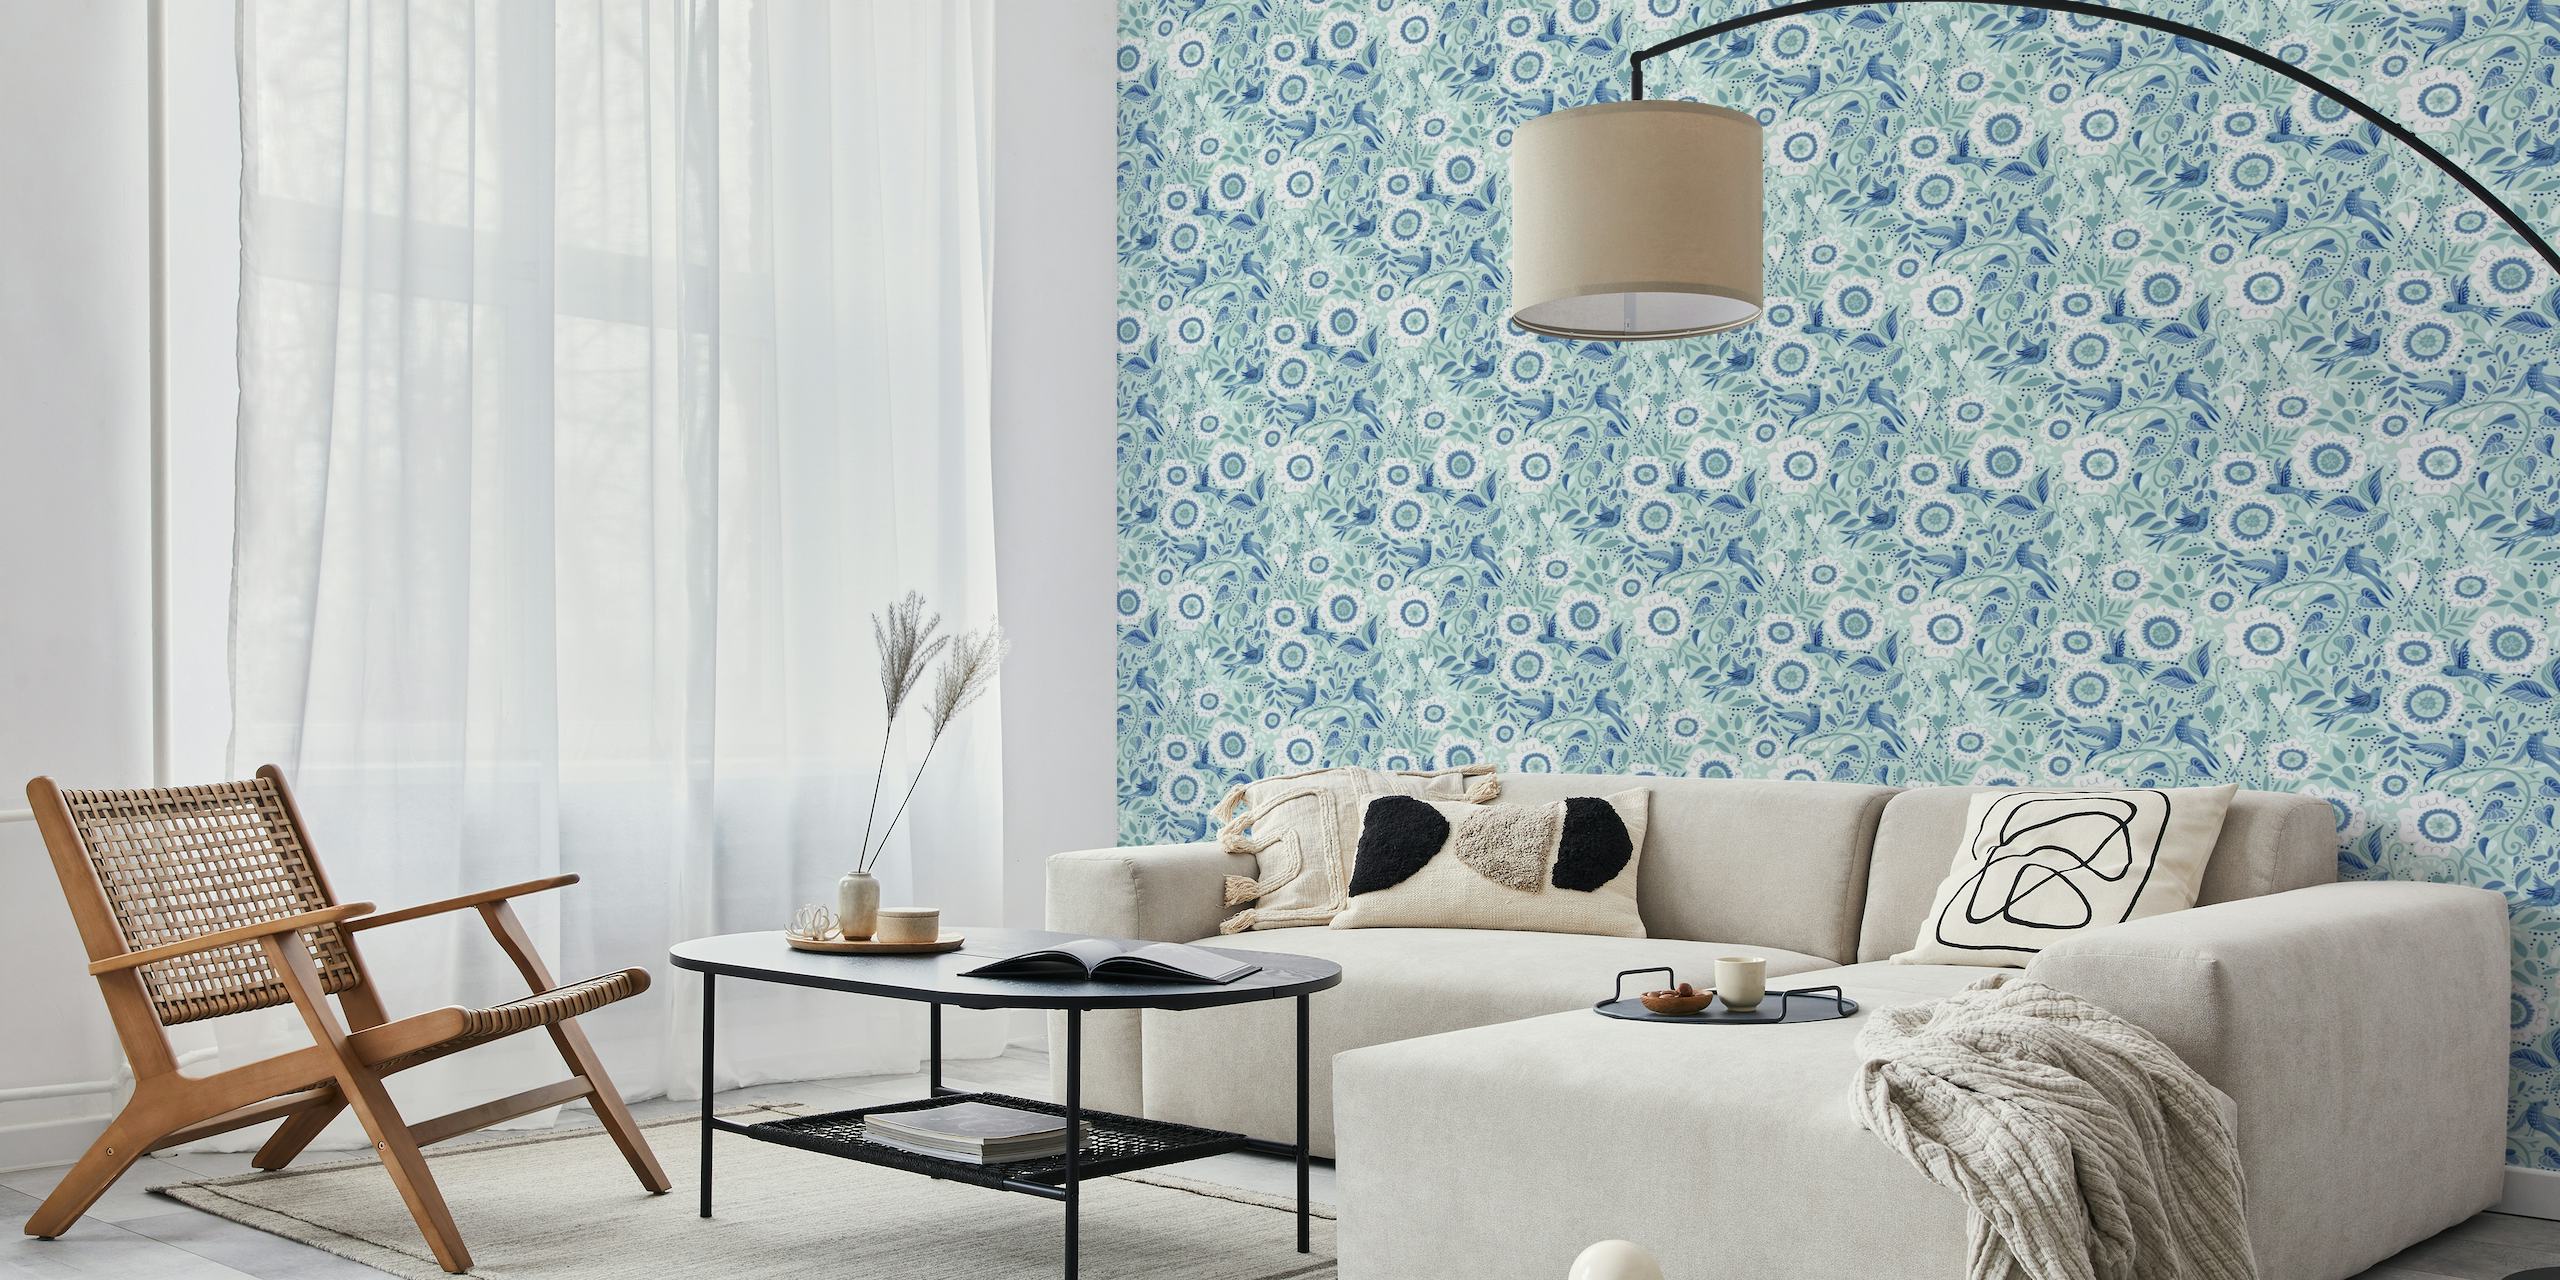 Blue birds and white flowers on mint wallpaper